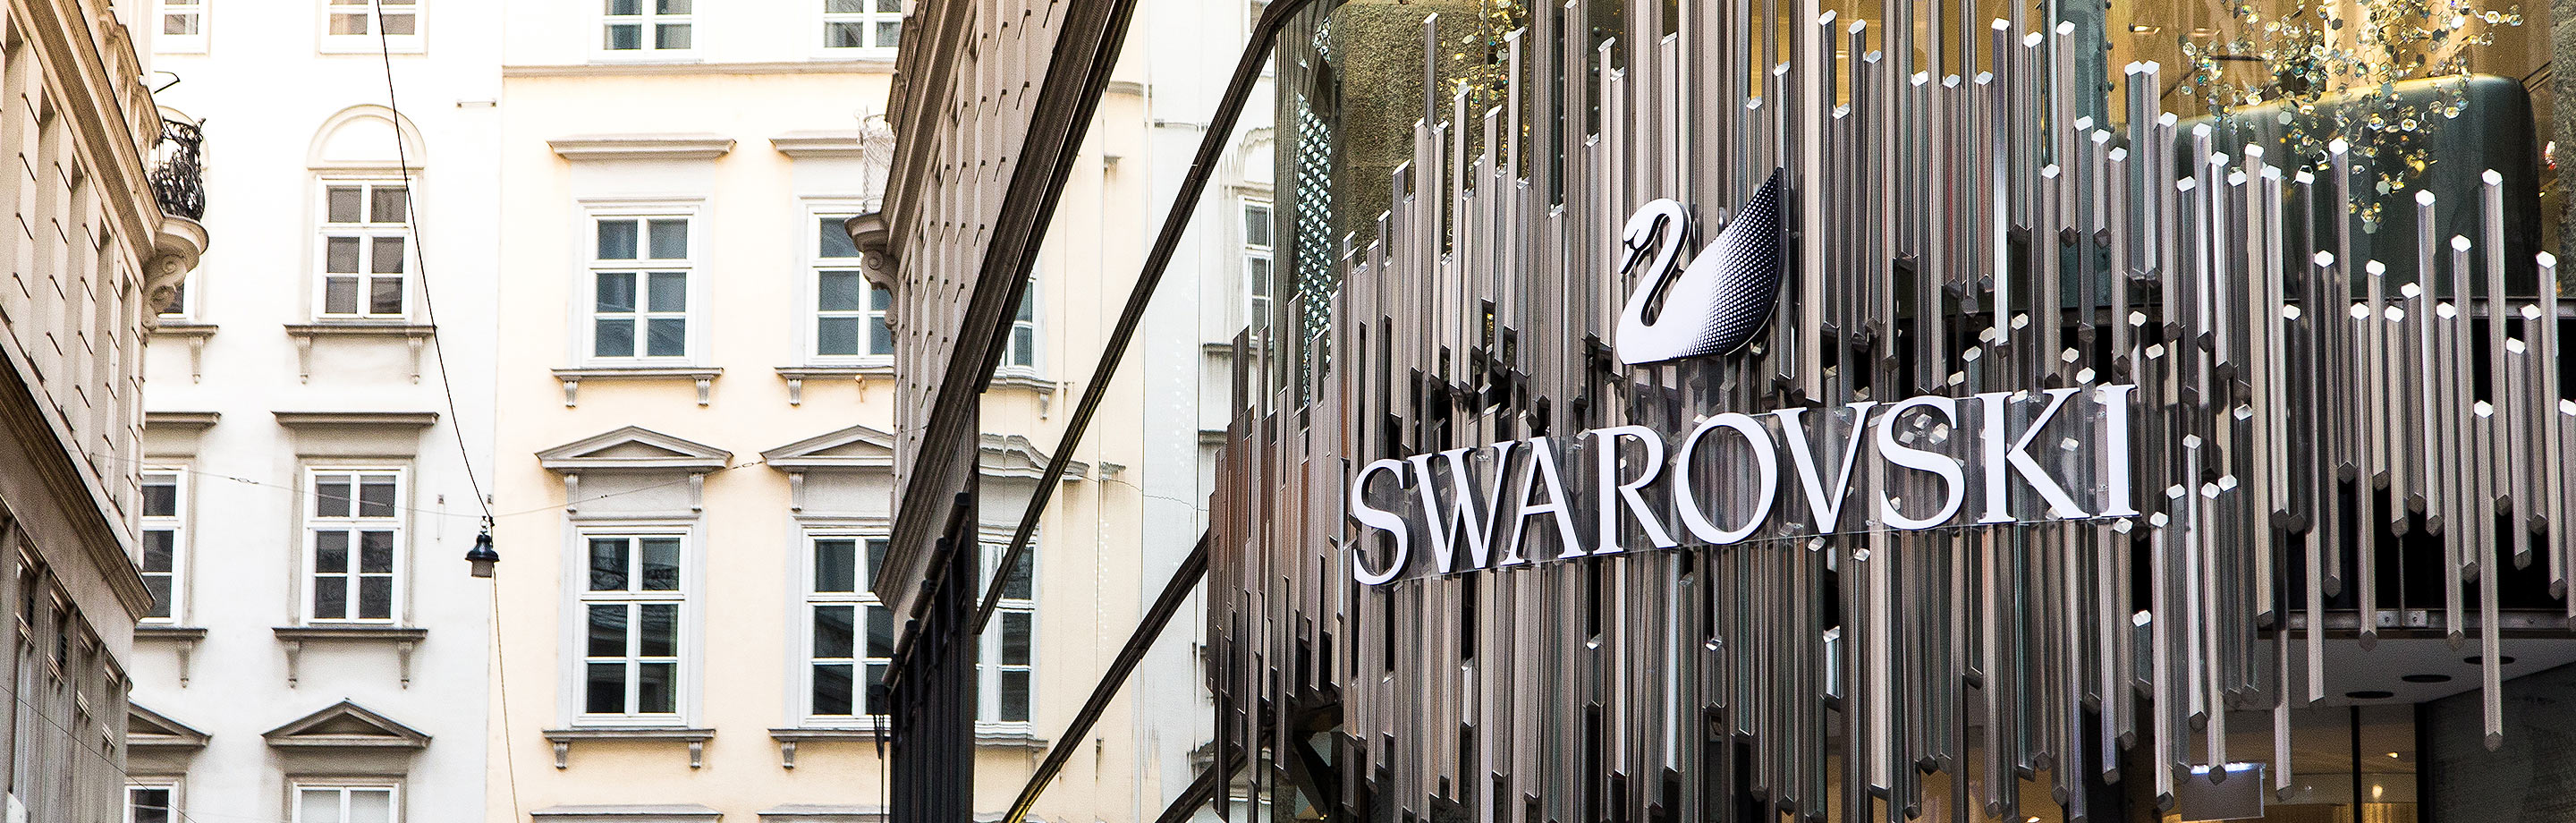 Exterior view of a Swarovski store with logo and swan symbol in front of historic old building facades